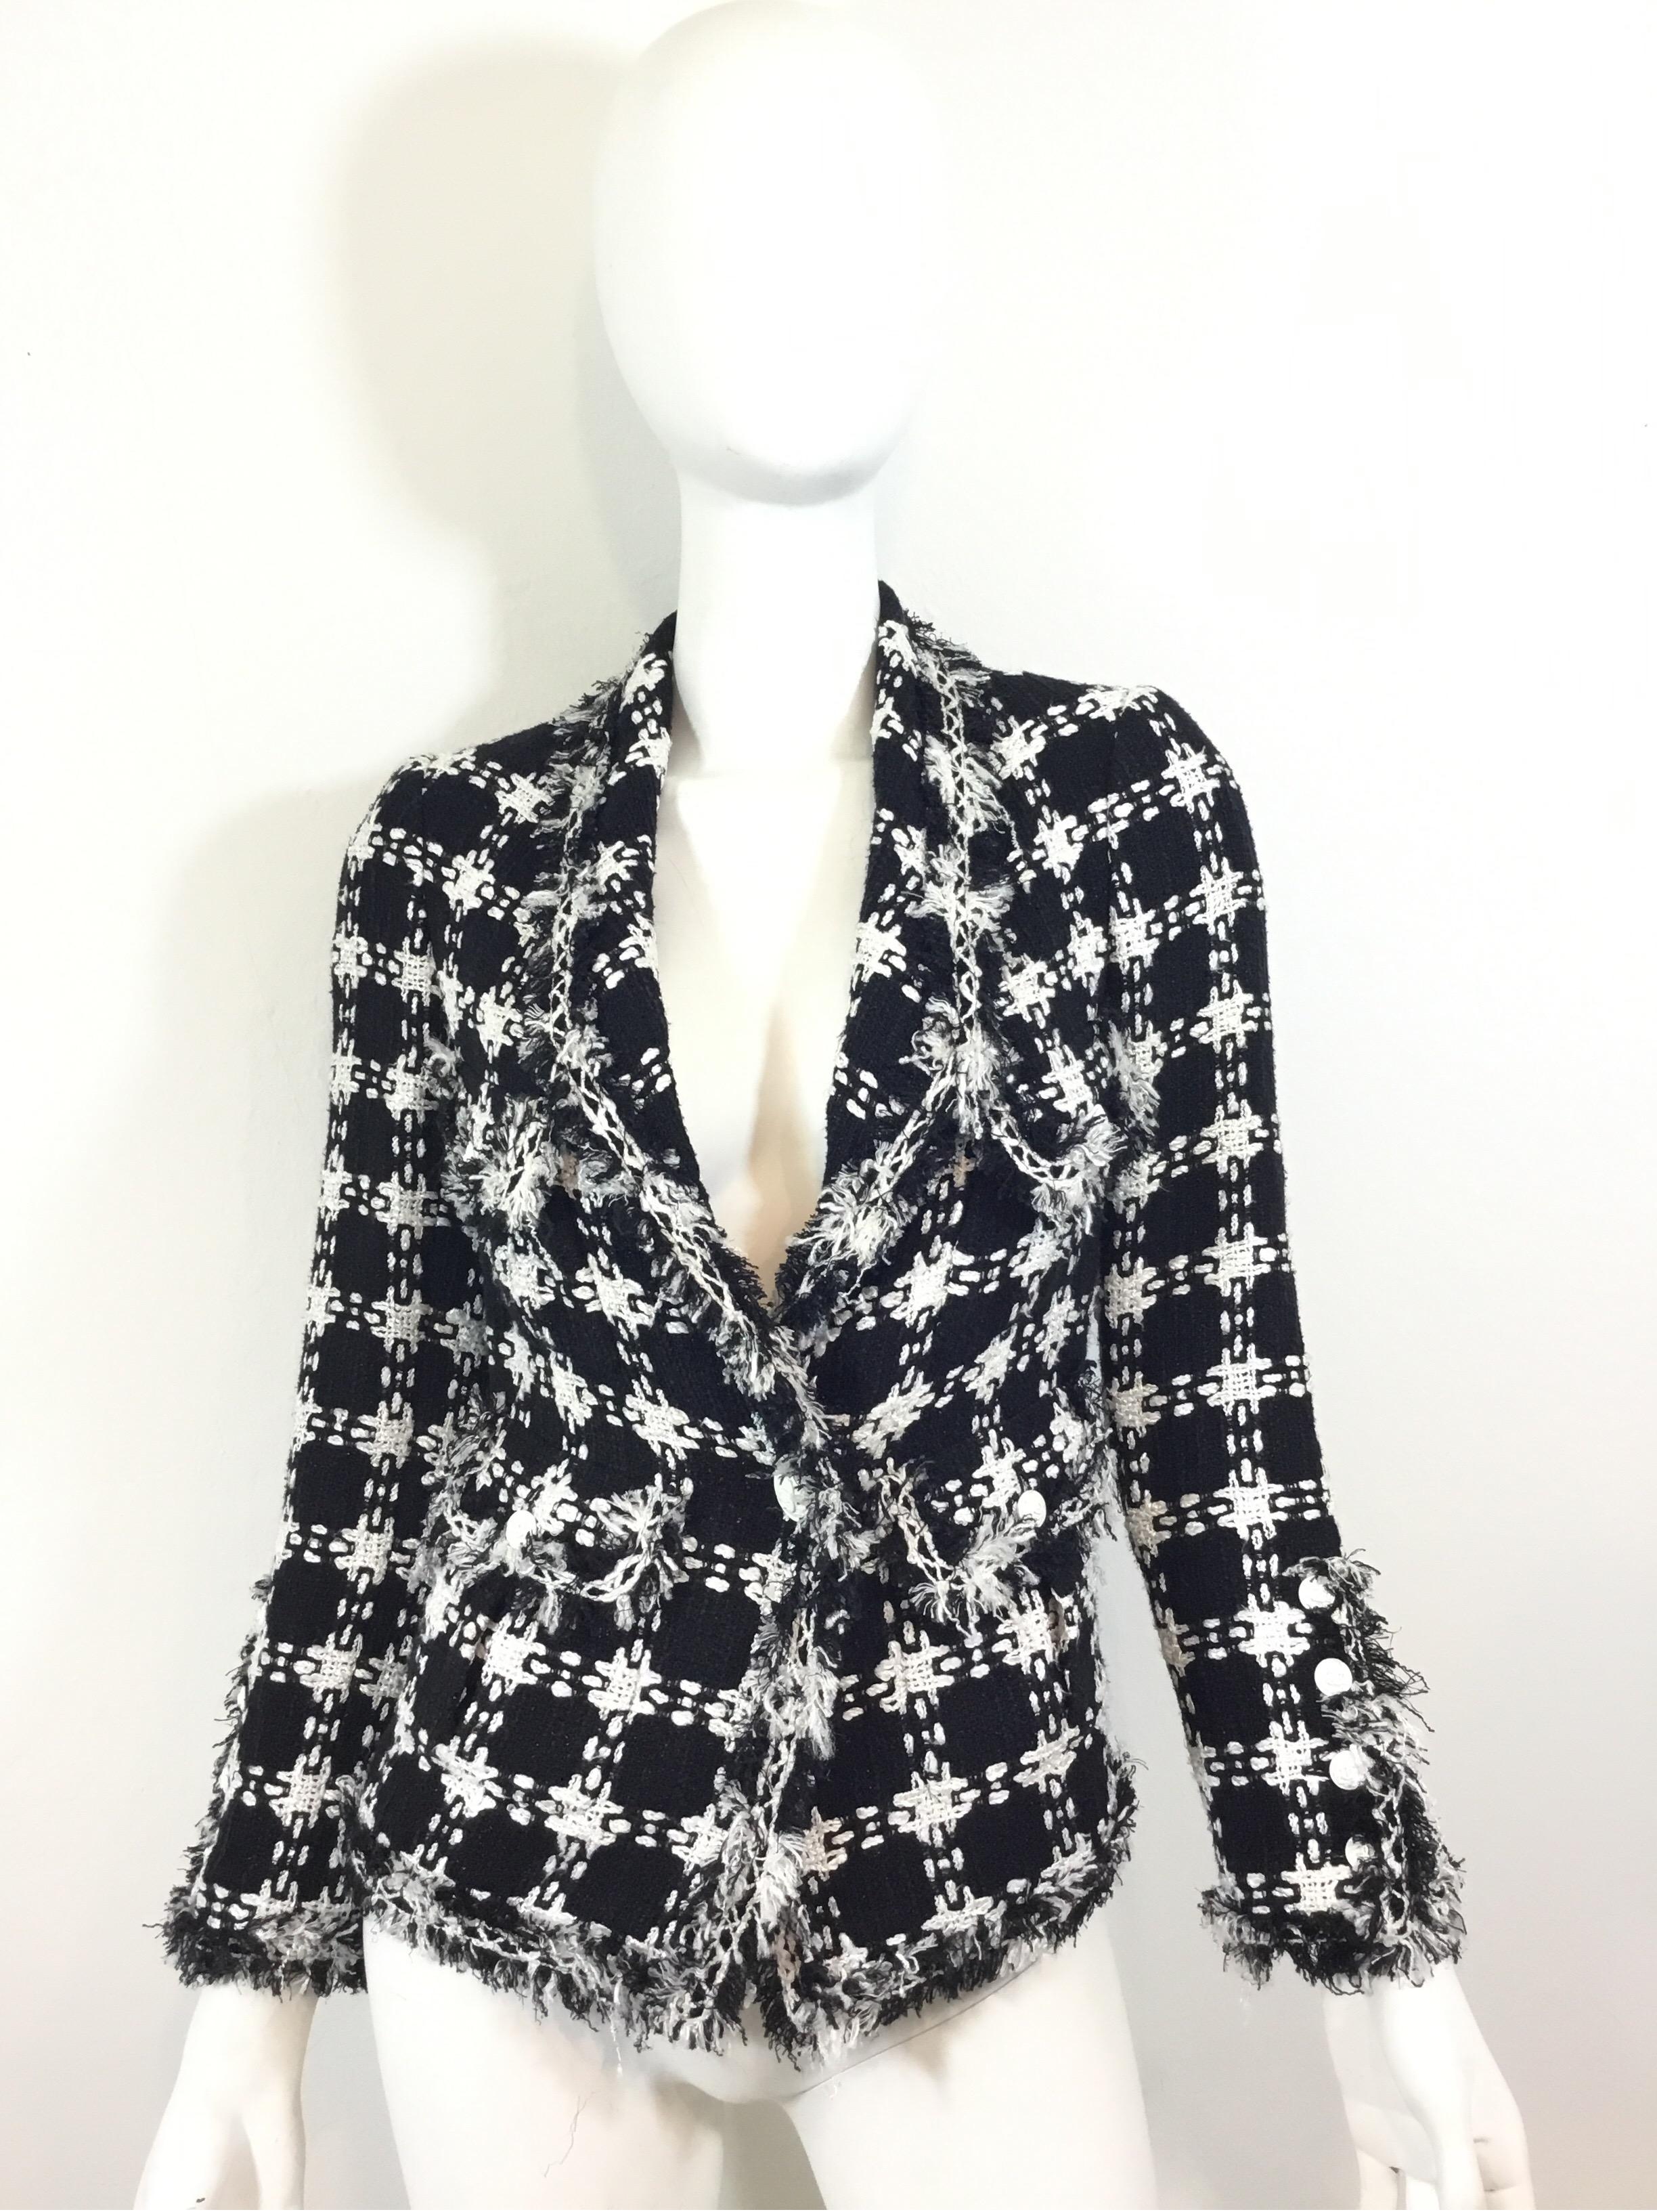 Chanel jacket in black and white tweed with fringed trimming throughout, White Quilted button closures, and four patch pockets with identical white buttons. Jacket is fully lined and has a chain trim along the hem. Size 34, made in France.

Bust